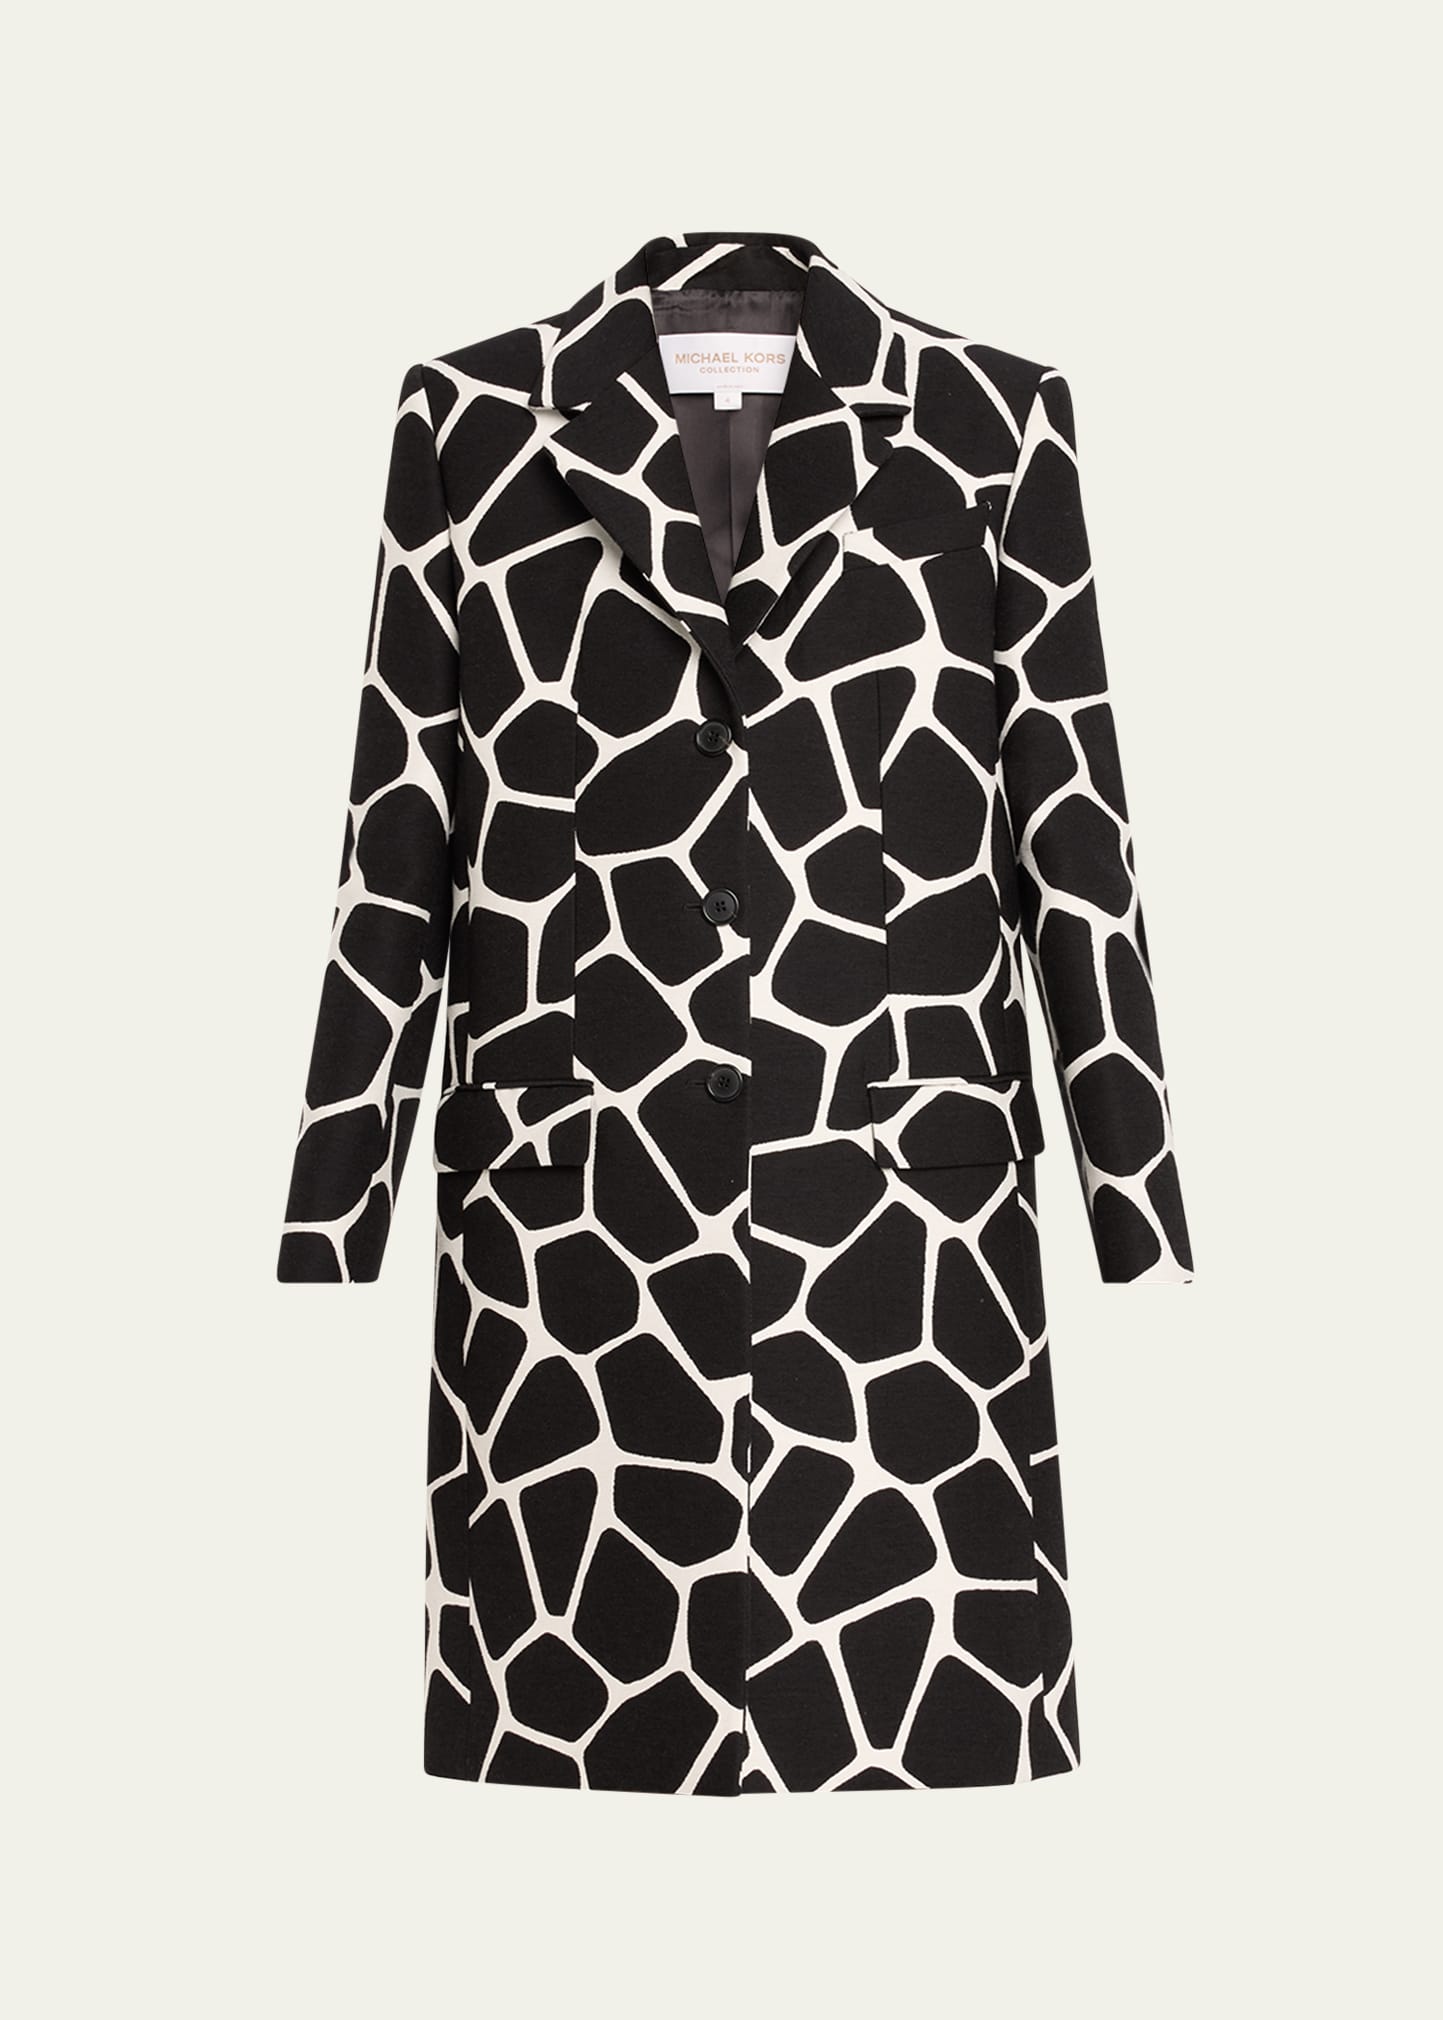 Michael Kors Printed Three Button Coat In Opt Wht/bl